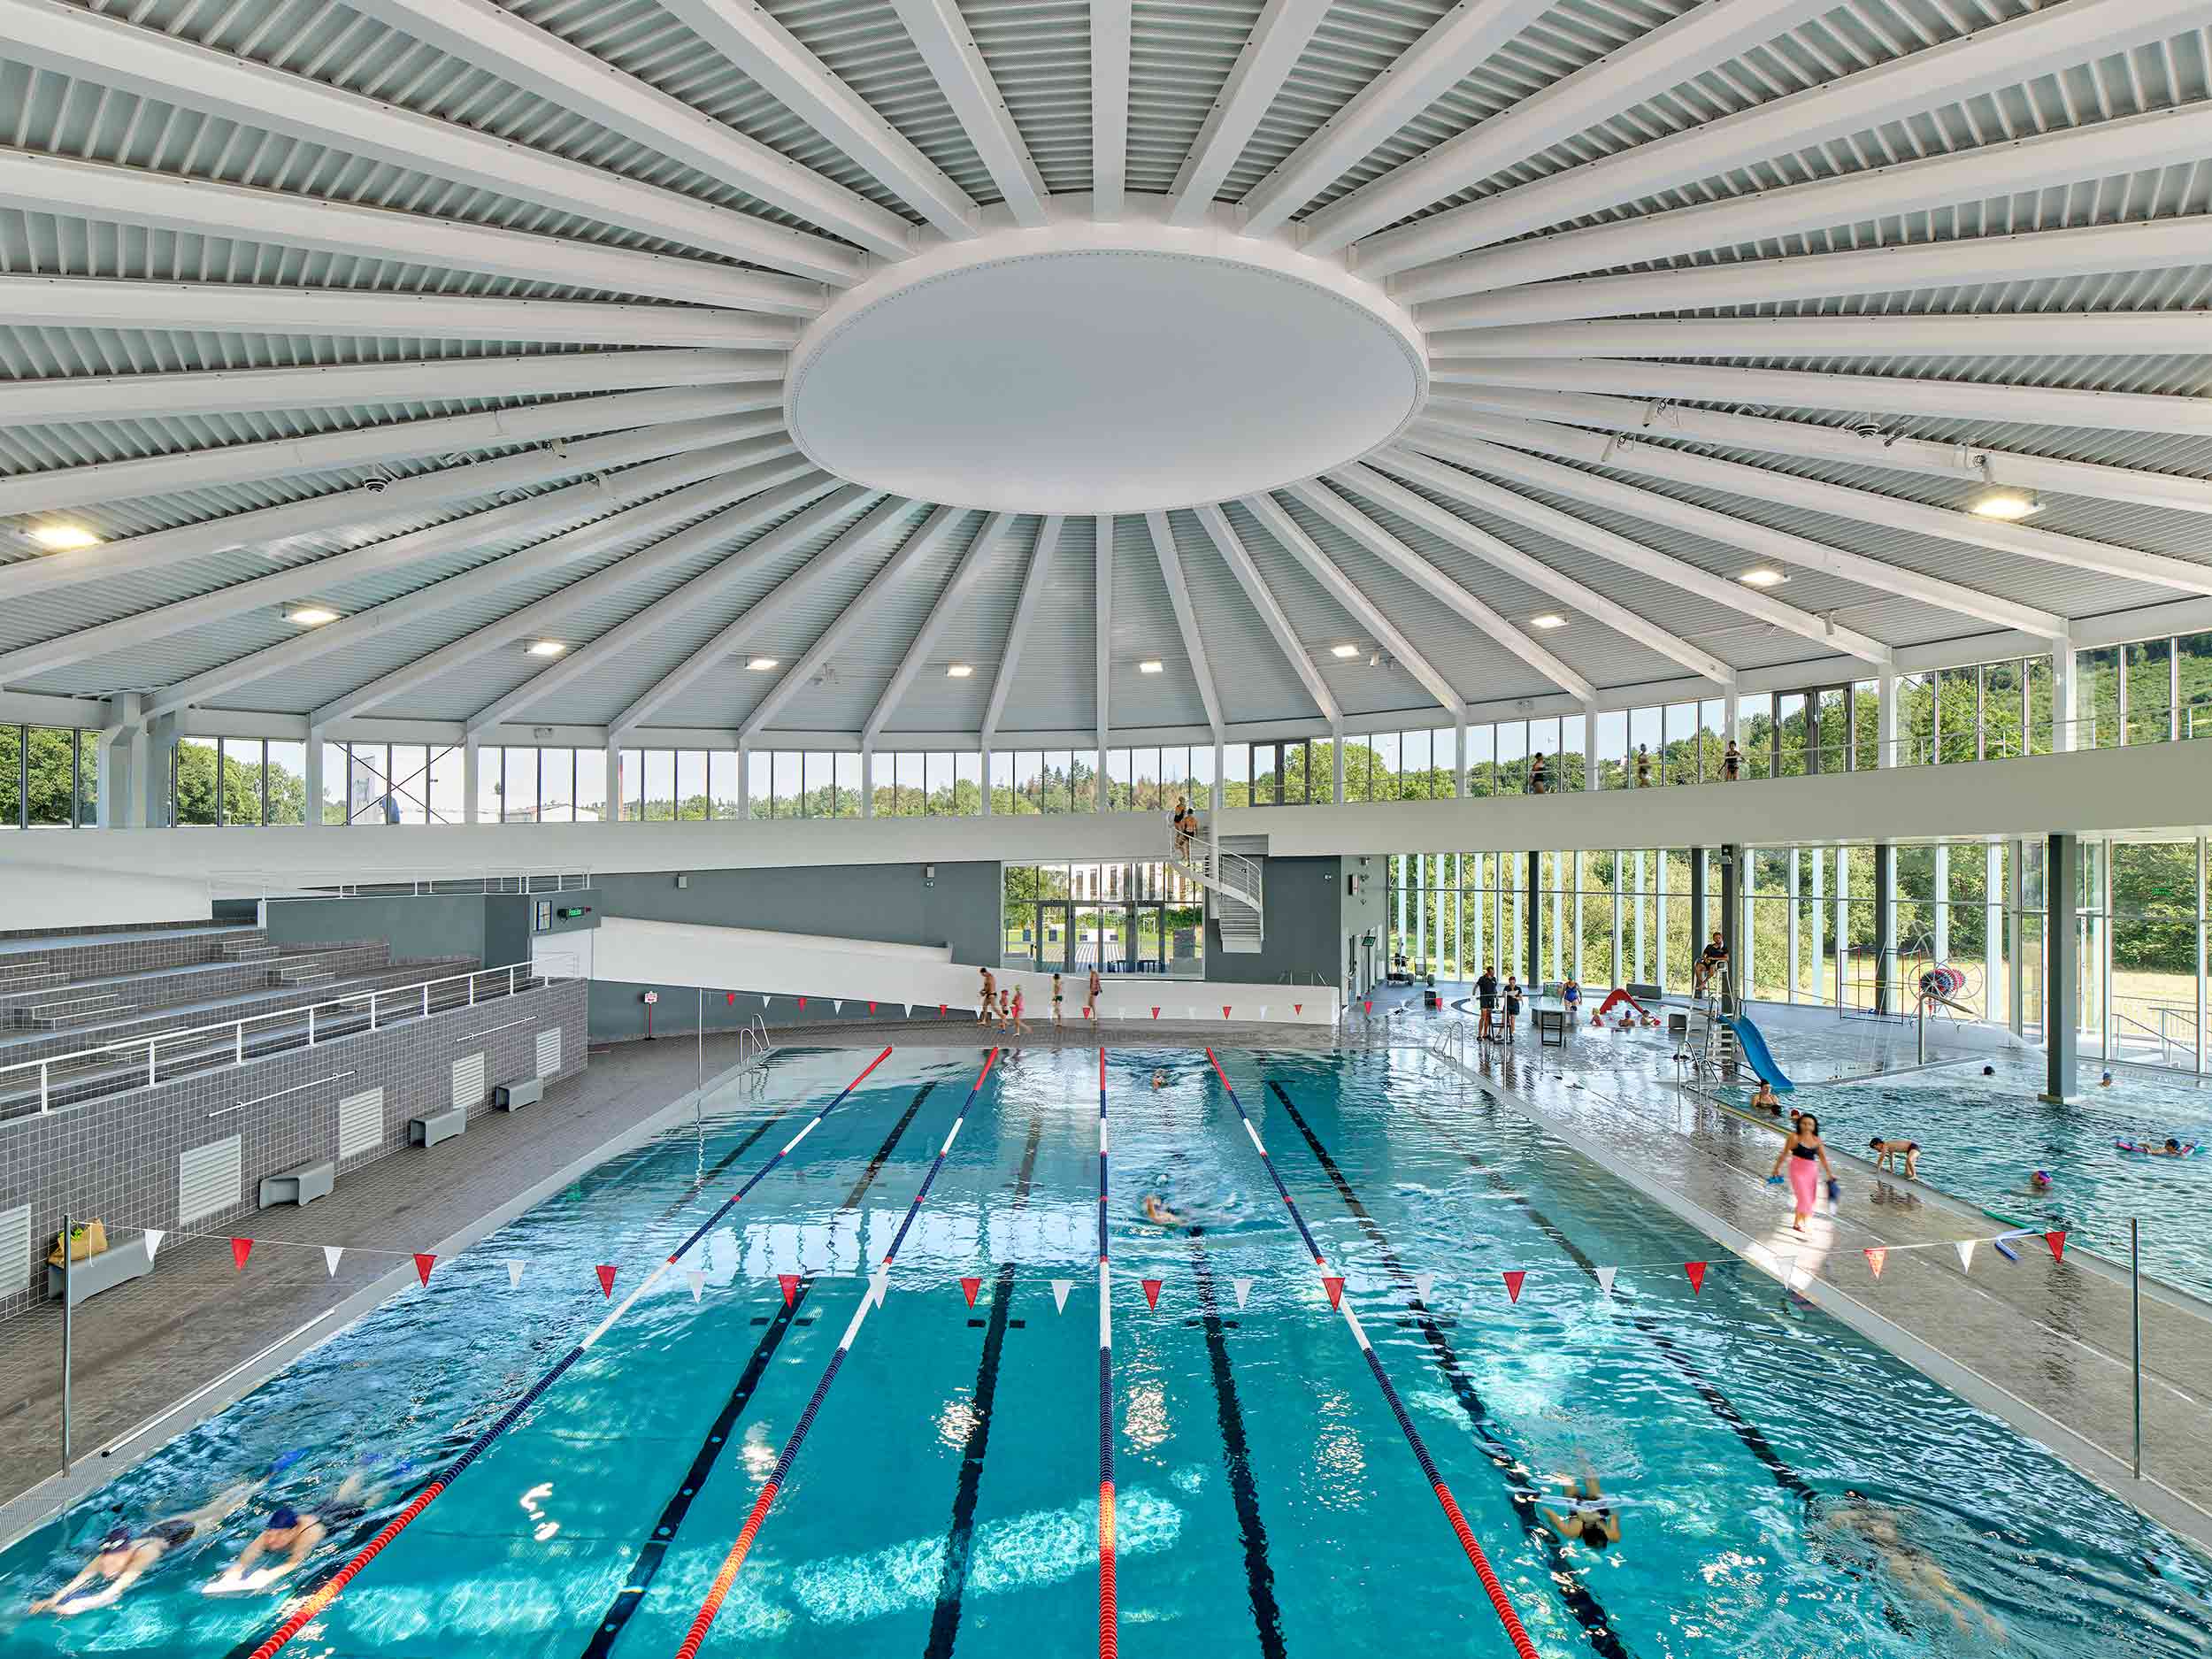 Community Swimming Pool, Châteaulin by Debuisson